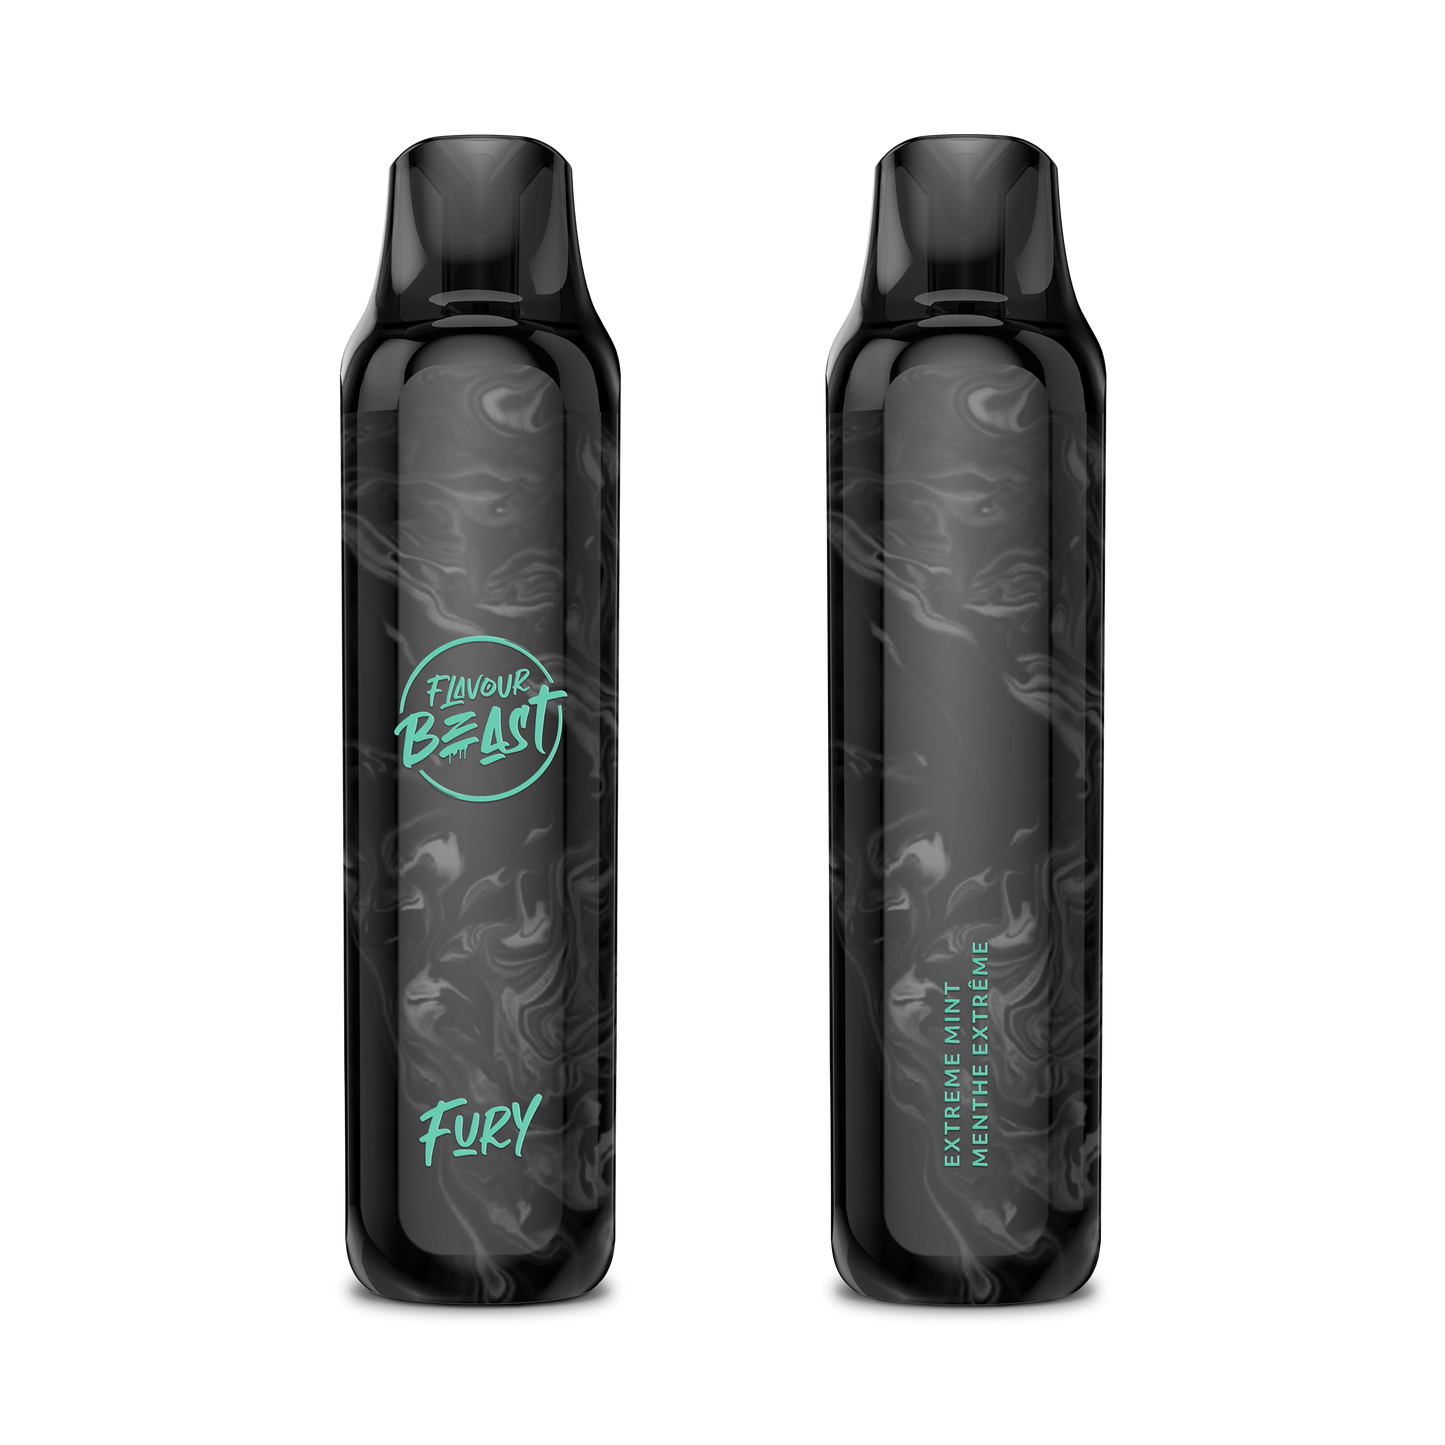 Fury - Extreme Mint Iced